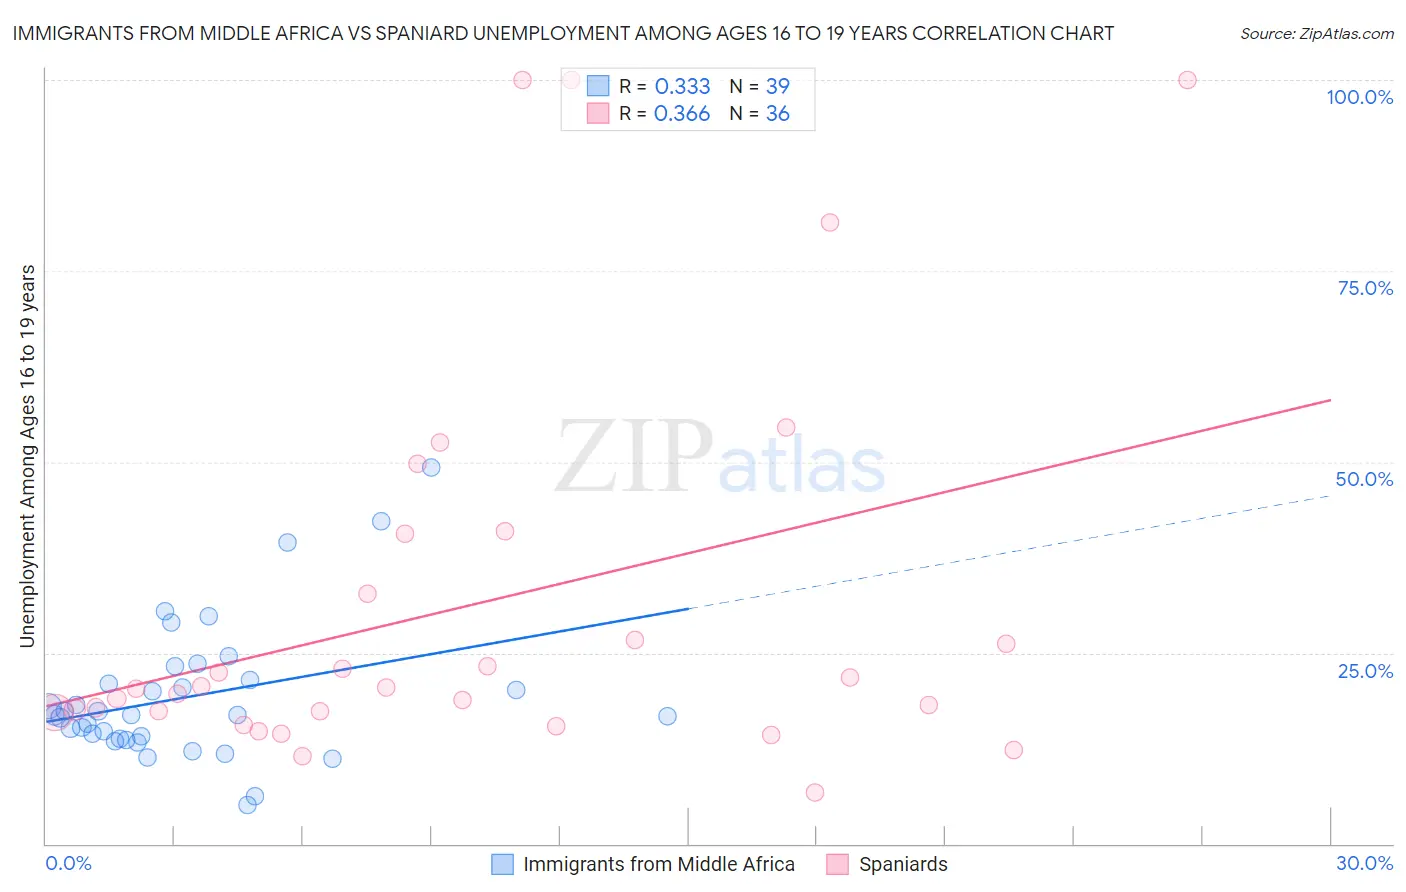 Immigrants from Middle Africa vs Spaniard Unemployment Among Ages 16 to 19 years